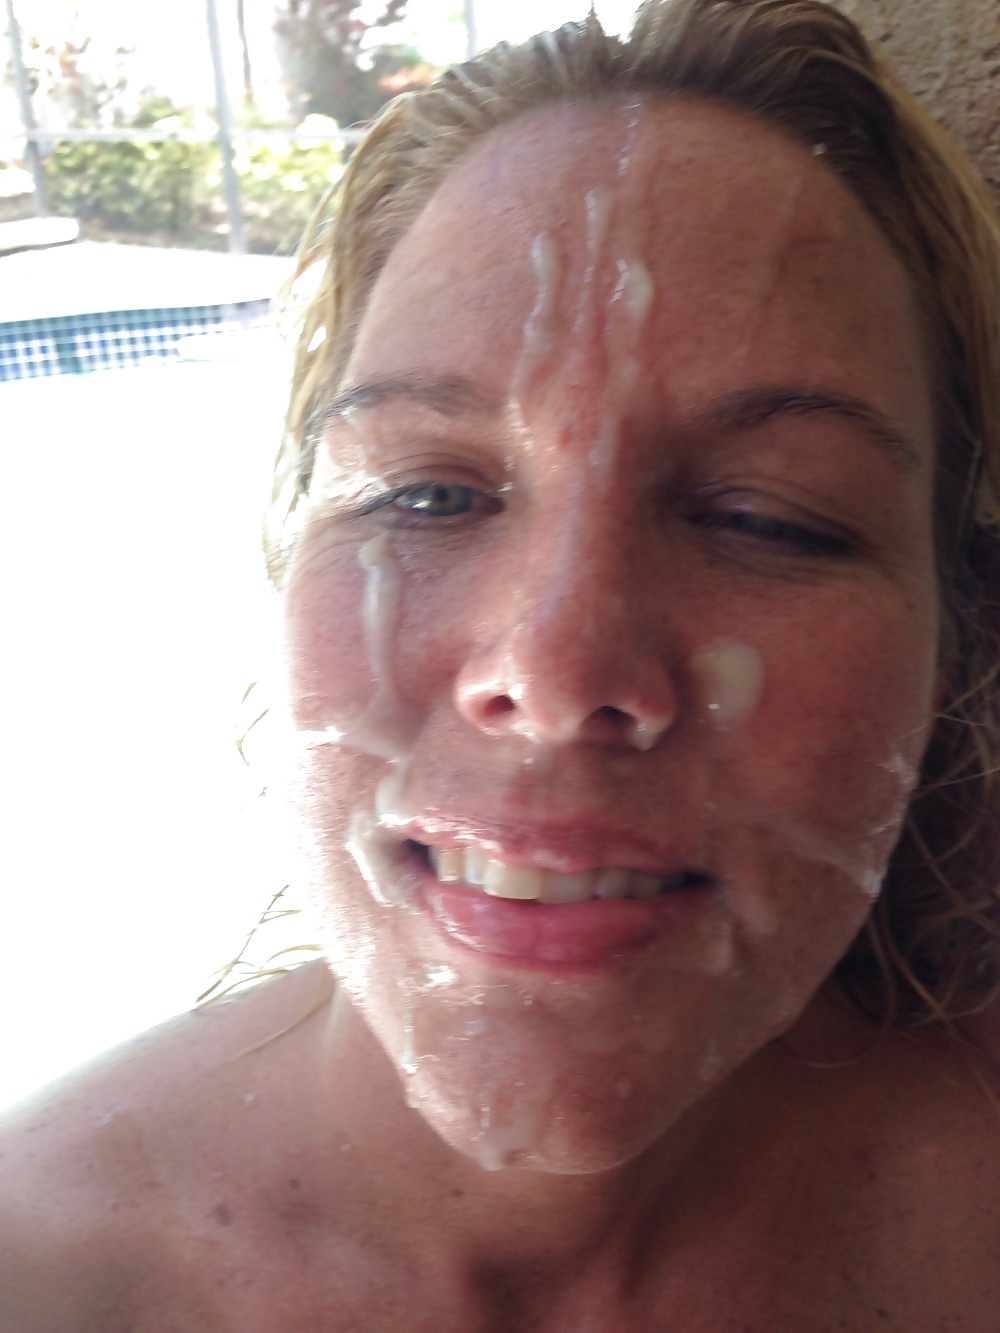 She feels sexy with cum on her face #28358999